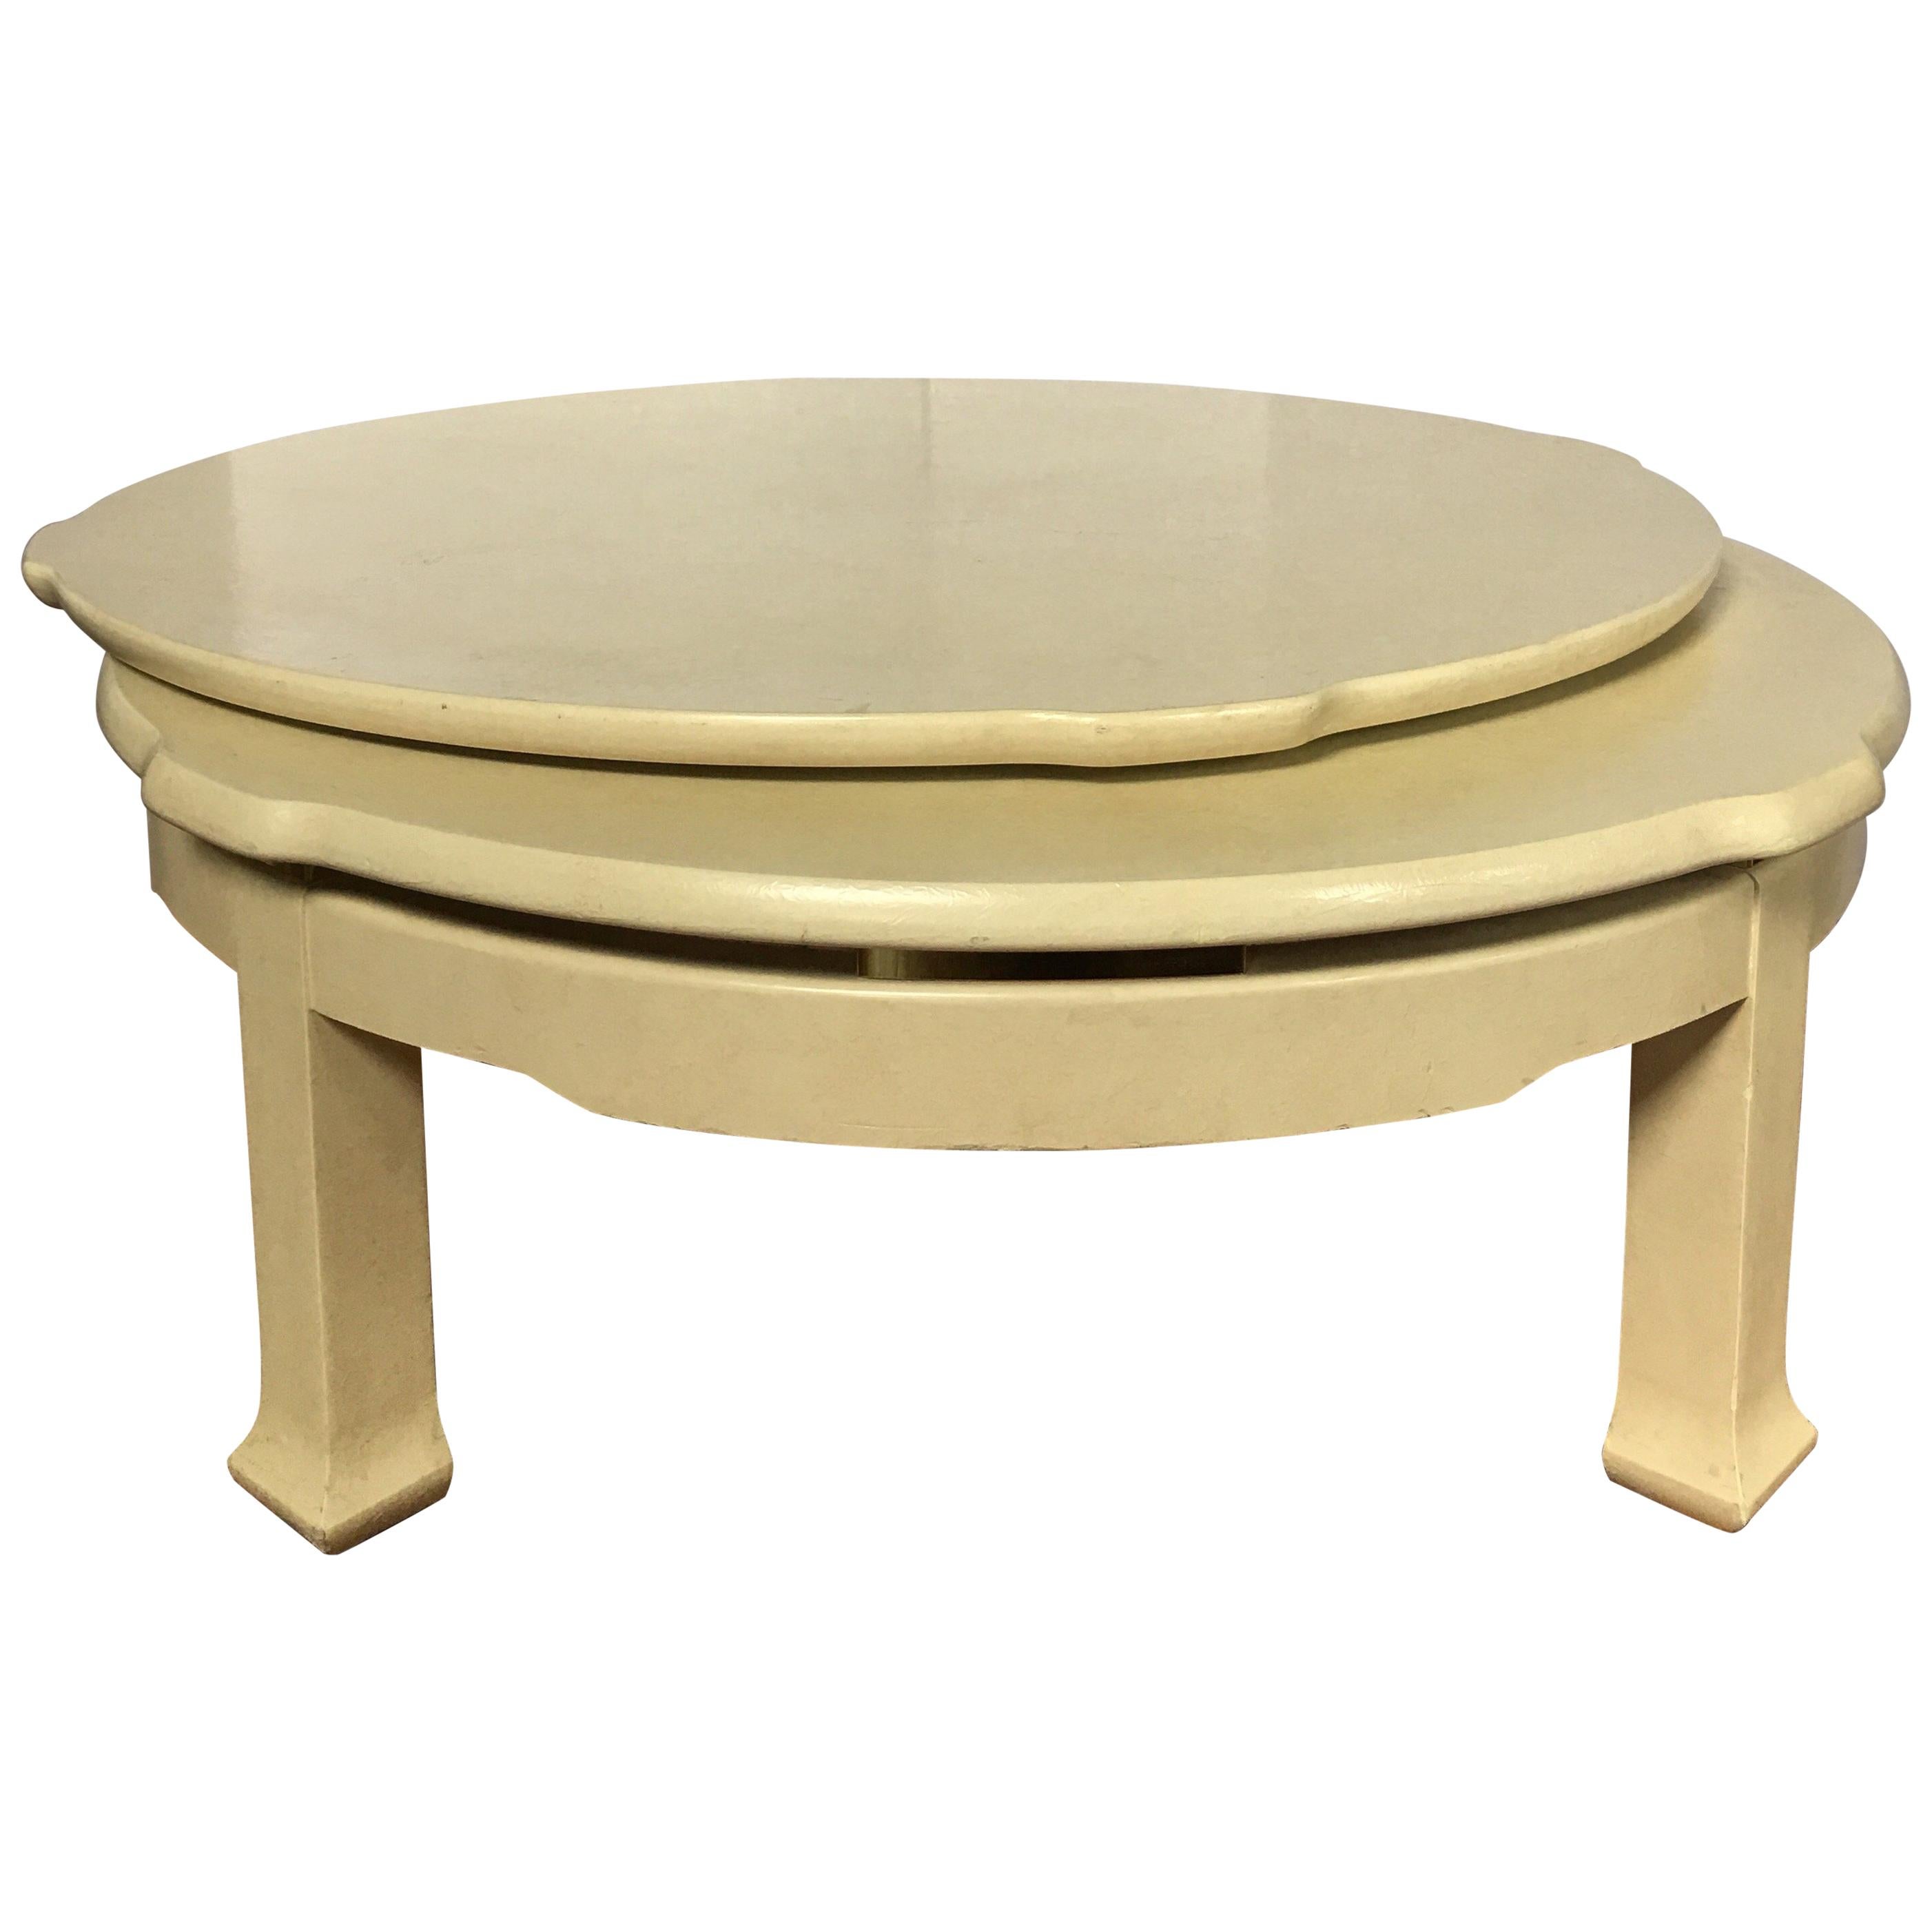 Hollywood Regency Sculptural Two-Tier Round Swiveling Coffee Table